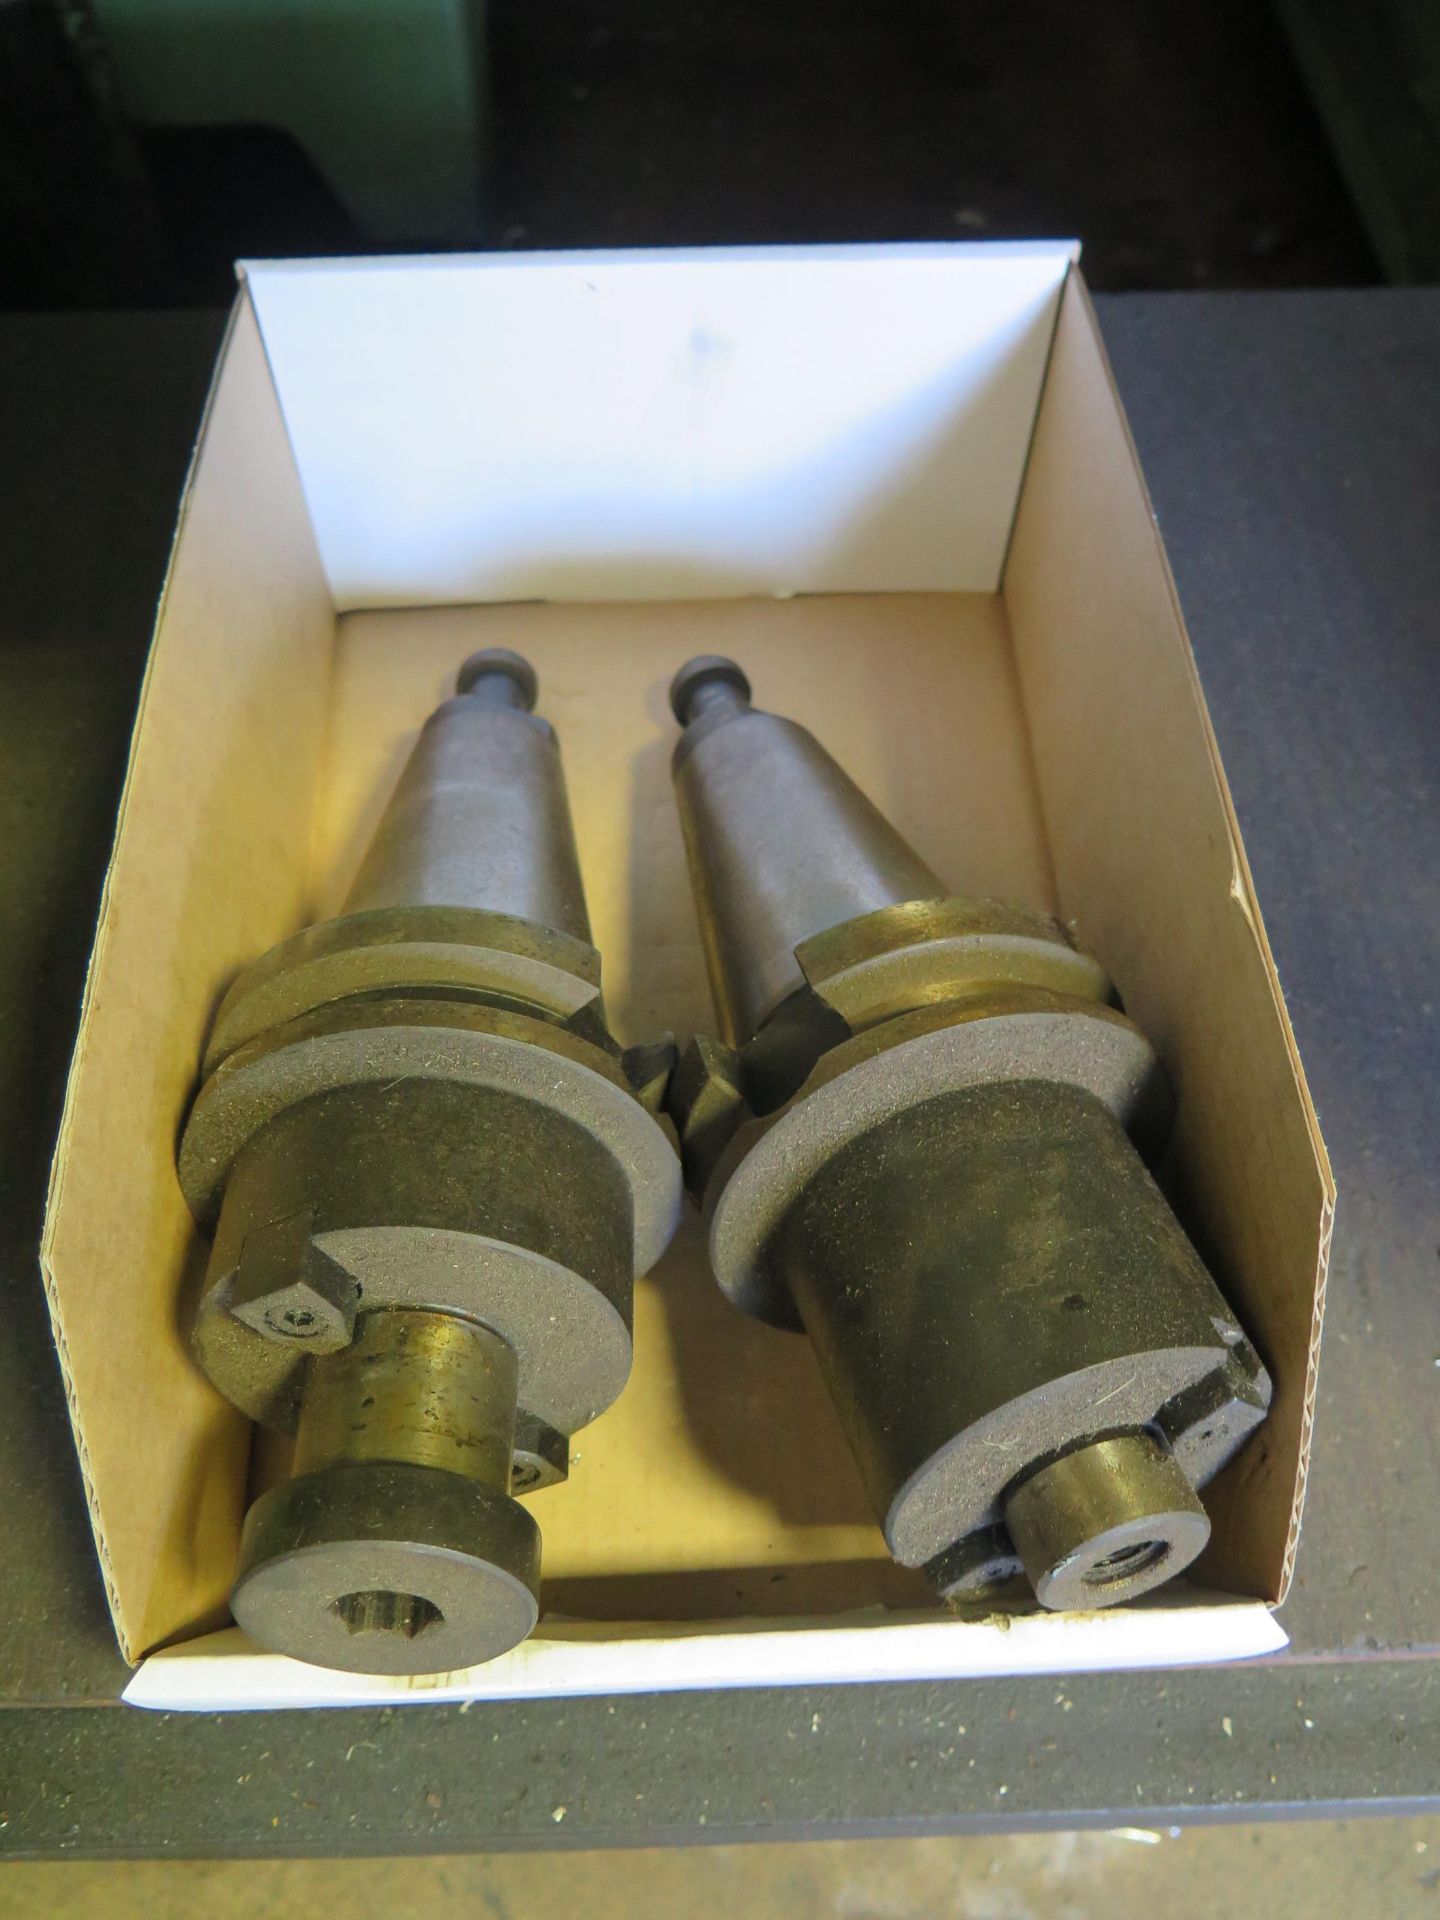 BT-50 TAPER BORING HEADS AND INSERT SHELL MILLS (10) - Image 3 of 3